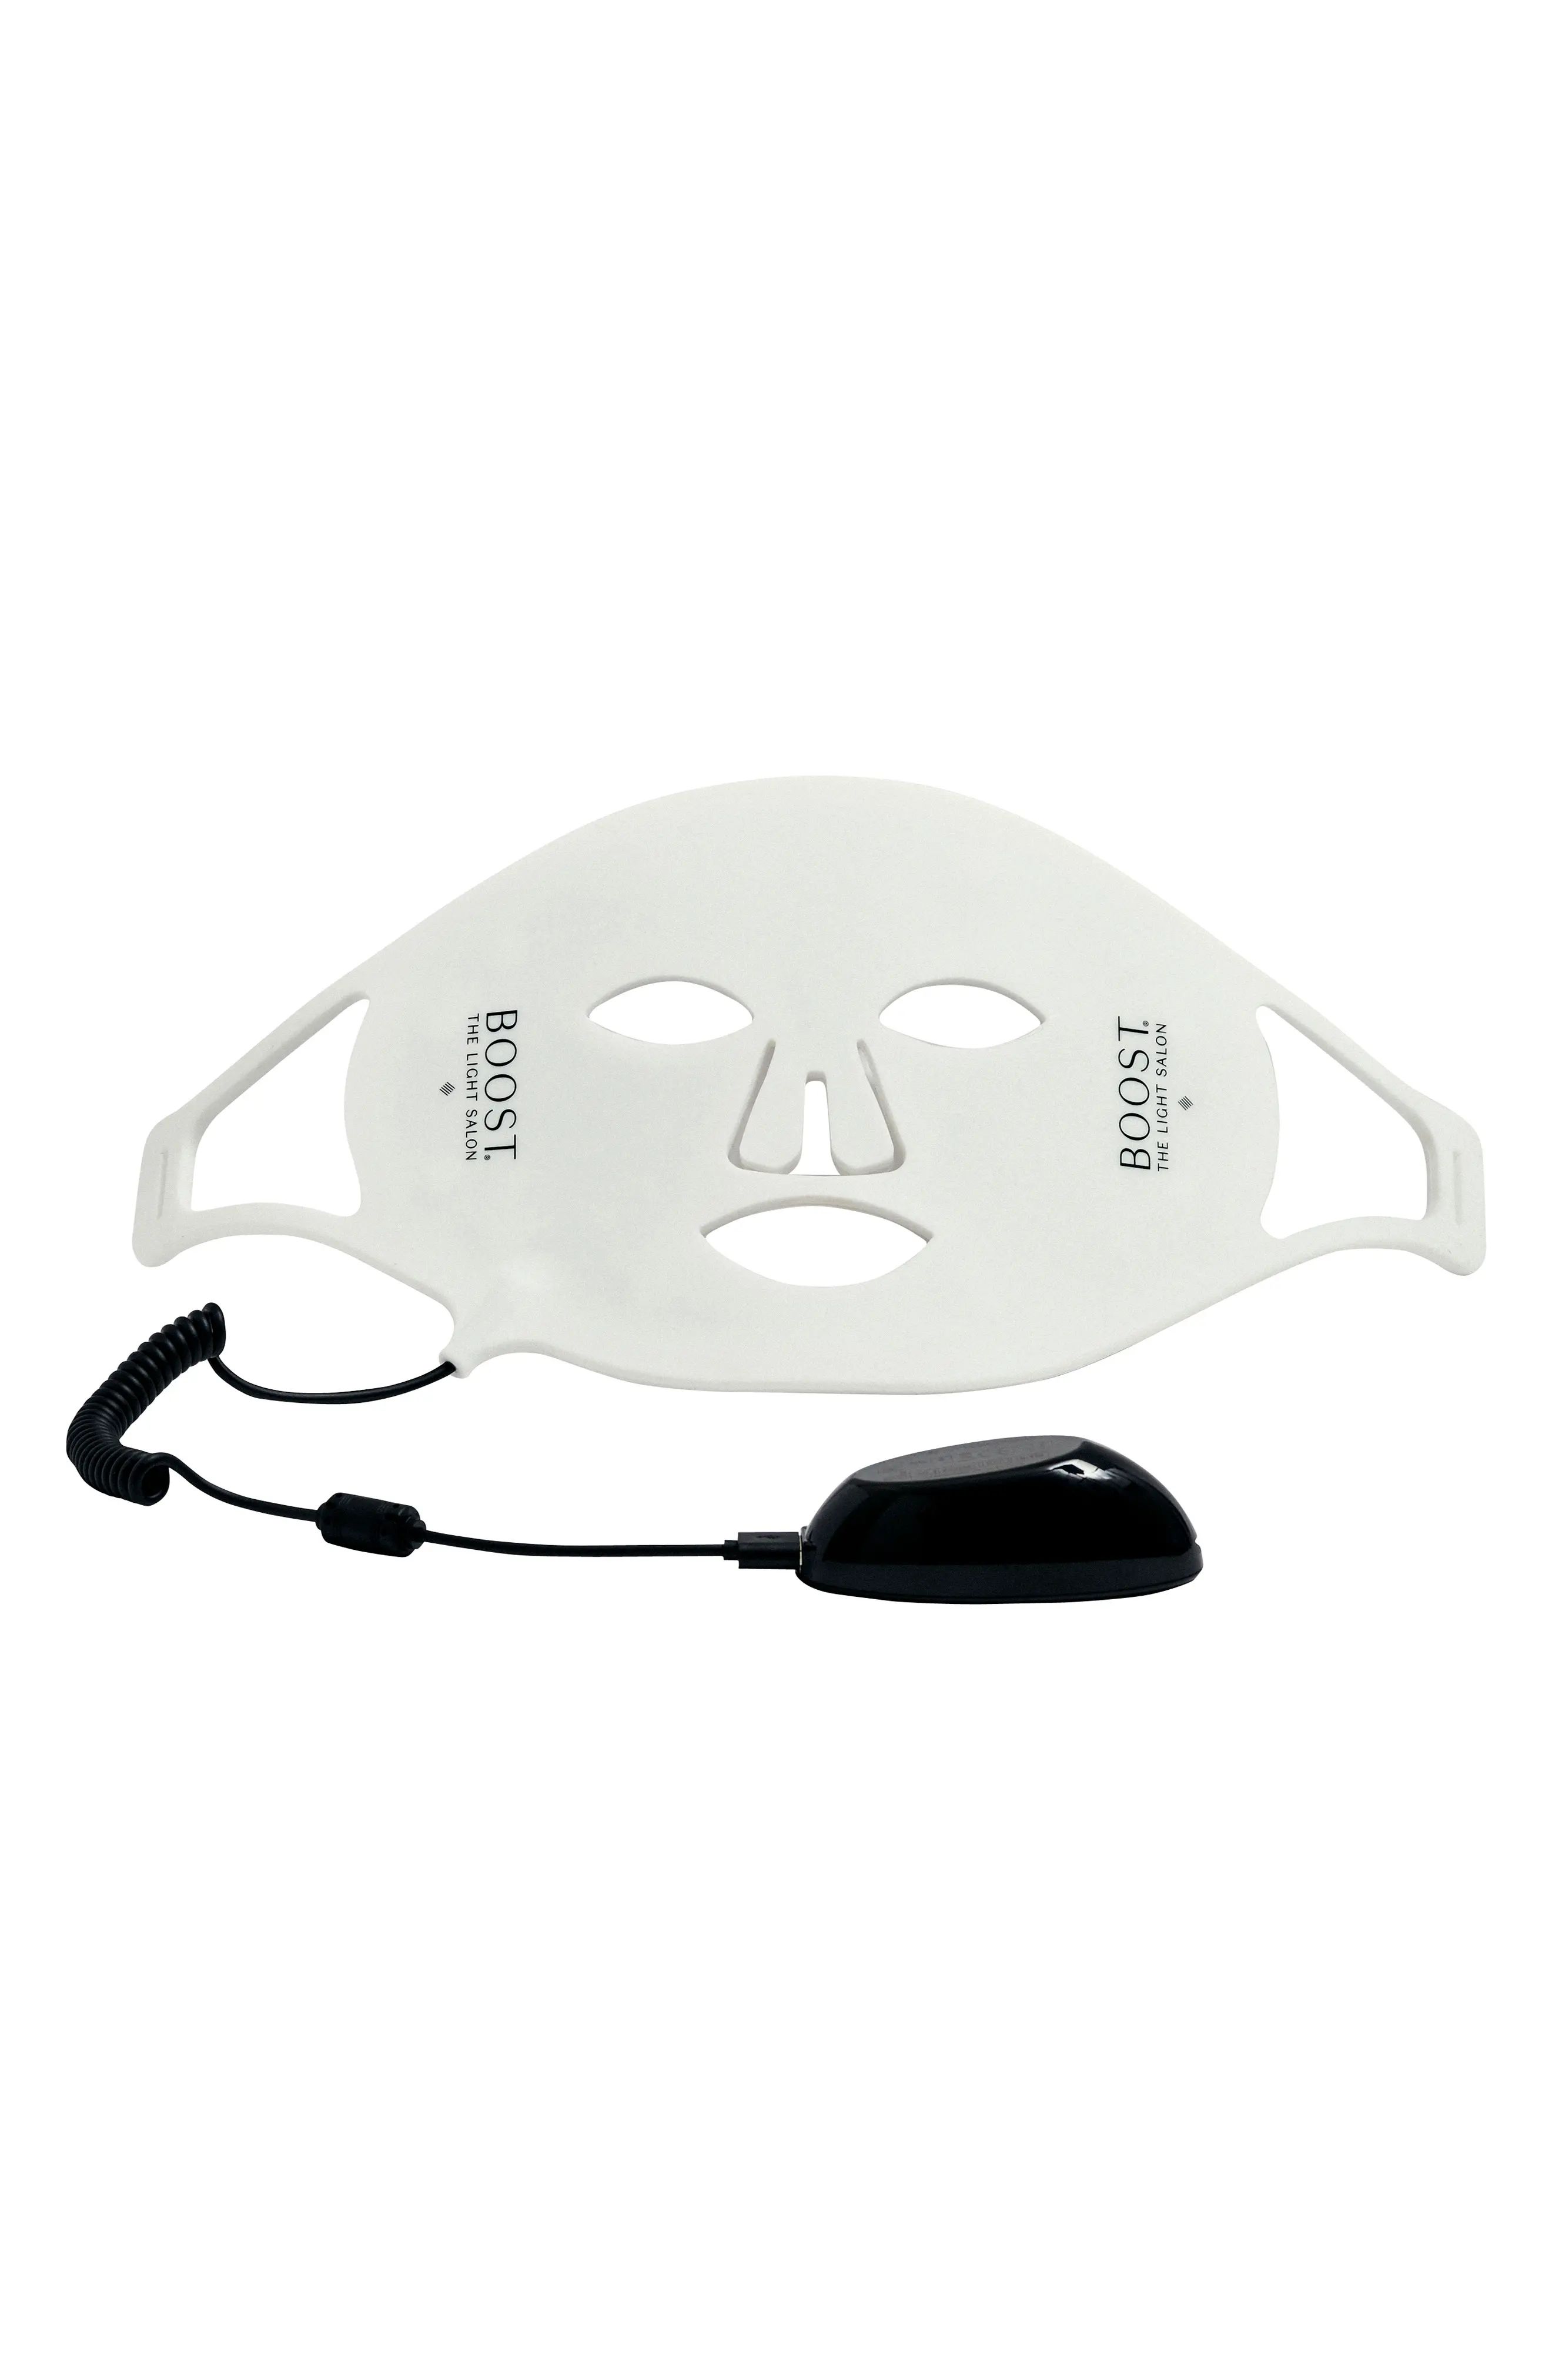 The Light Salon Boost Advanced LED Light Therapy Face Mask at Nordstrom | Nordstrom